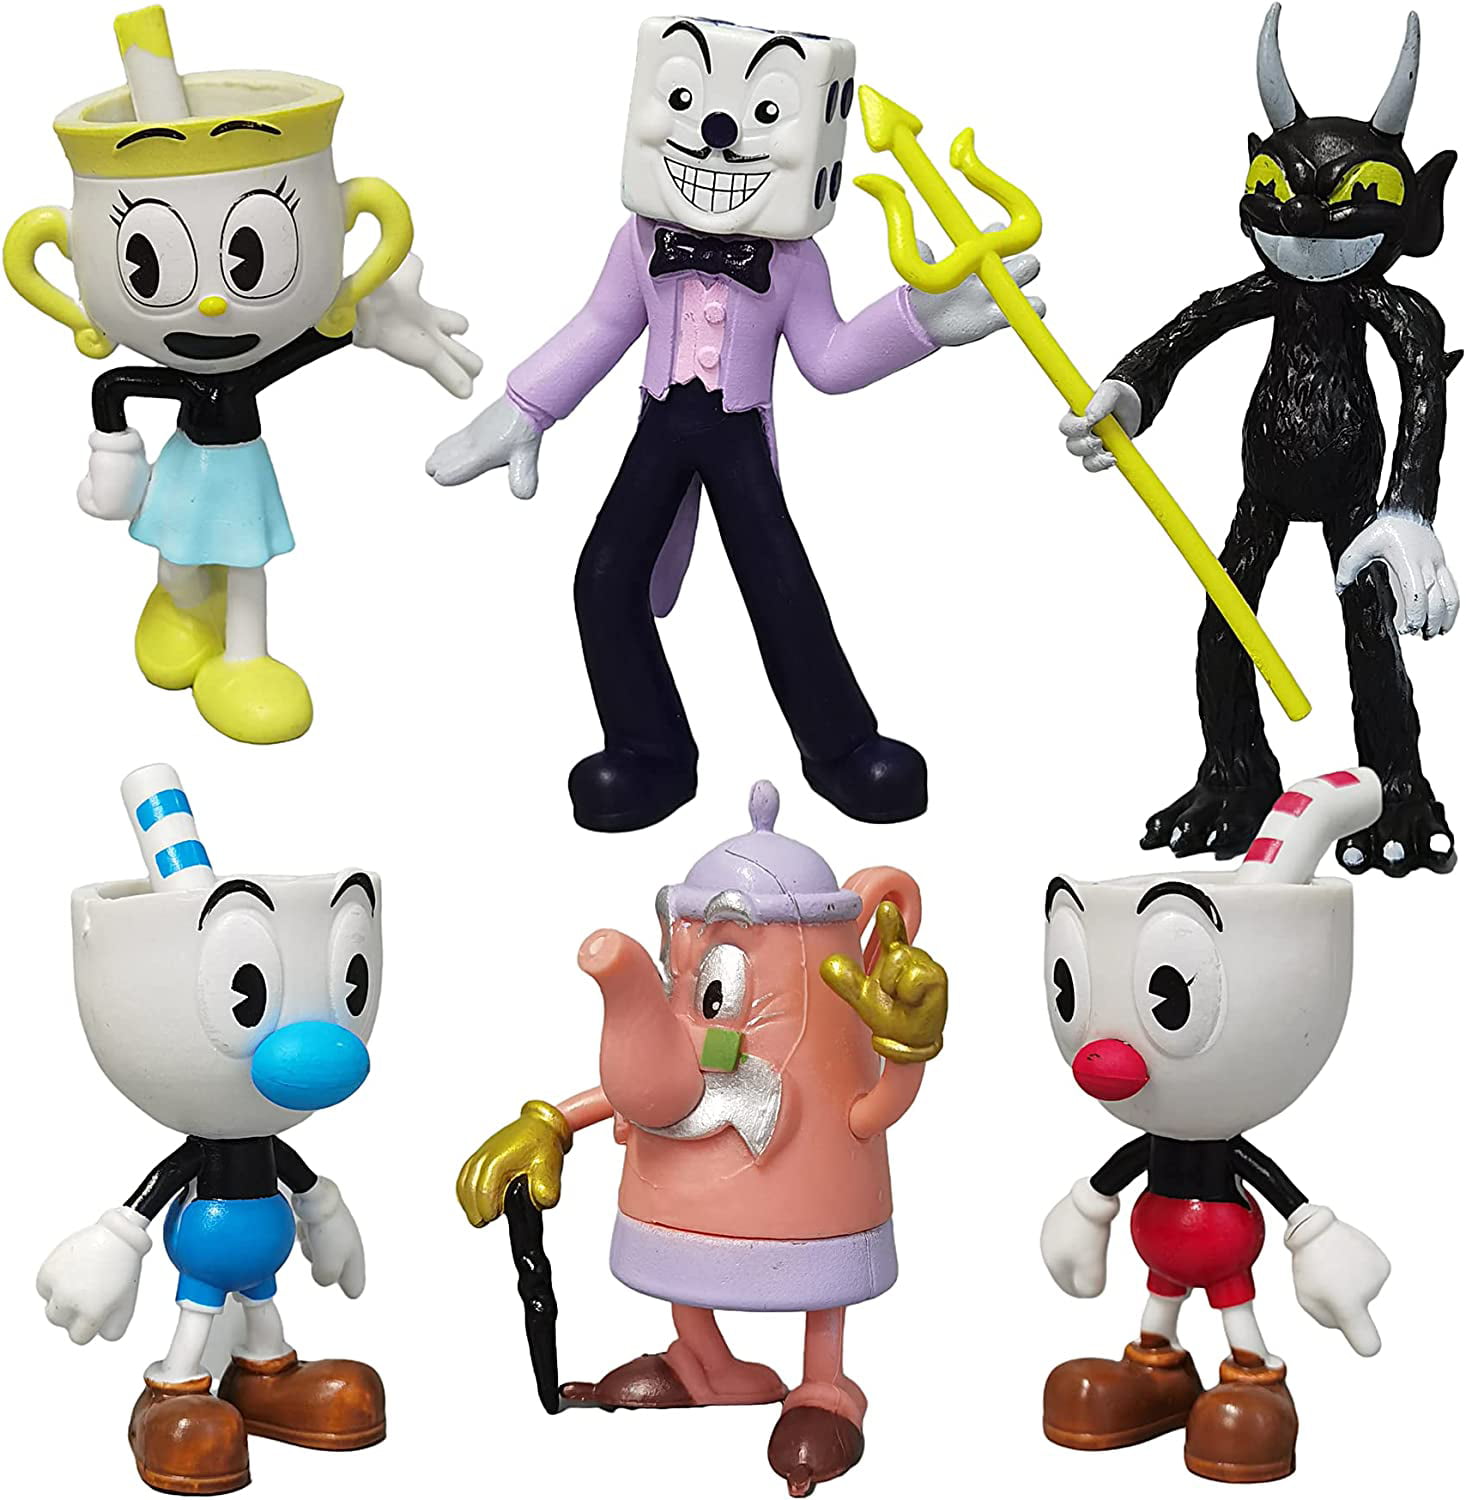 The Cuphead Show Brother Cartoon 6 Models Action Figure Doll Game